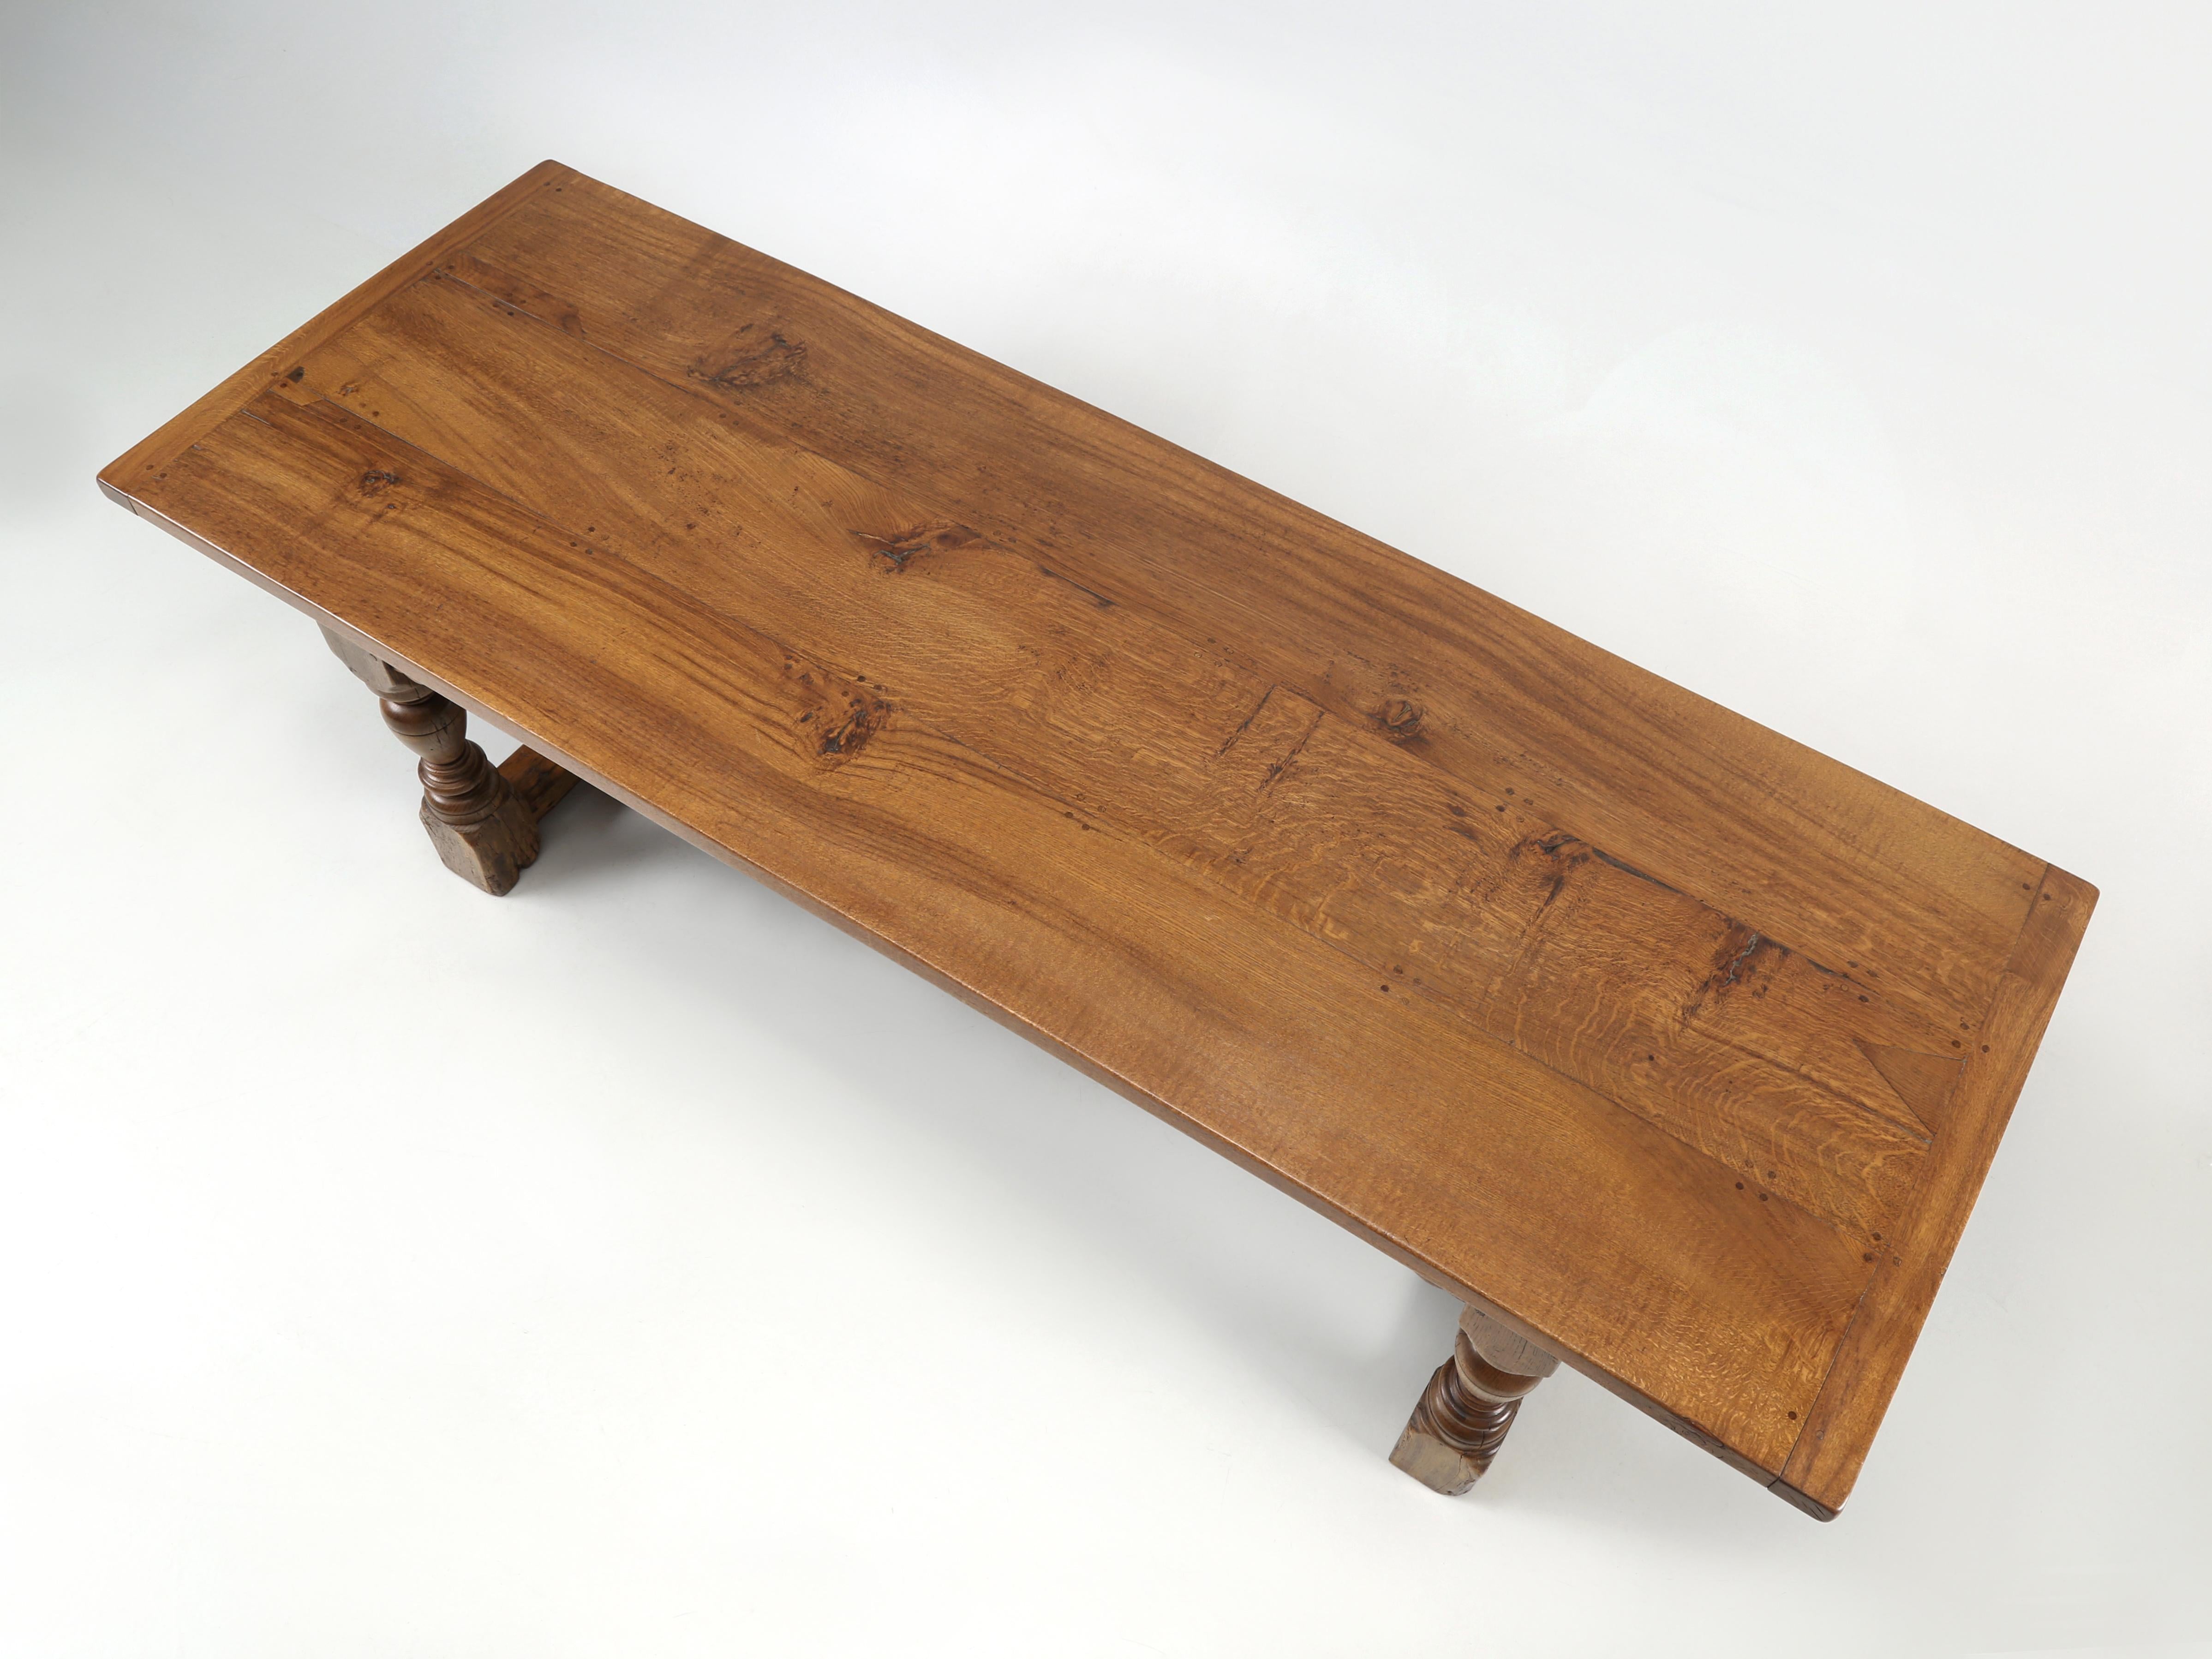 Antique English Farmhouse Dining Table made from extremely rare Scottish Oak and at first glance, you would have thought the antique English Dining Table was produced from mahogany, until you take a harder second look. We have been importing from